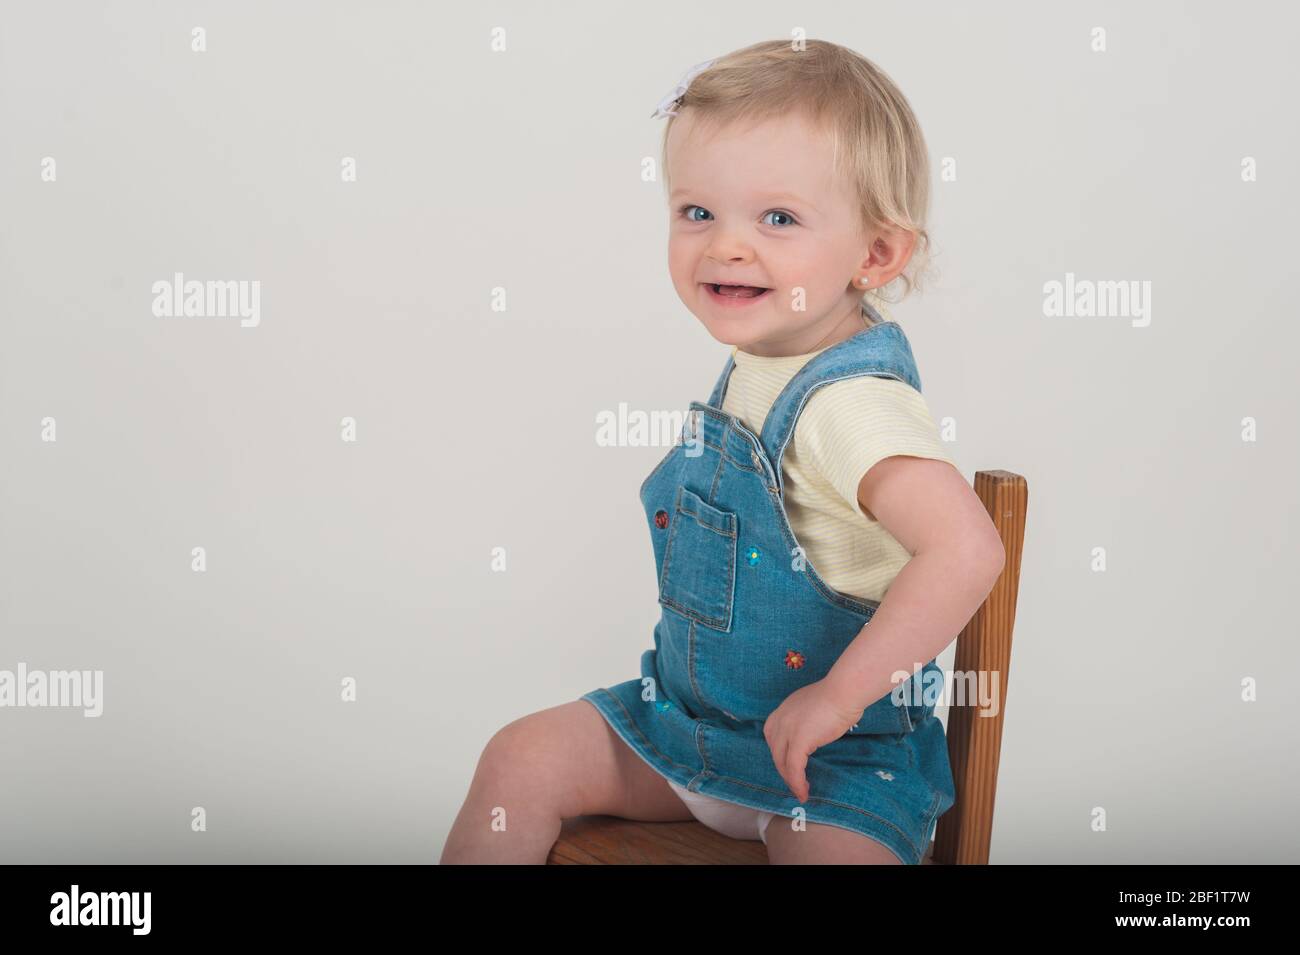 Adorable 18 months old toddler girl smiling to her mama while sitting on her wooden chair in Aurelia Dumont Photography studio in Playa Del Rey, CA. Stock Photo